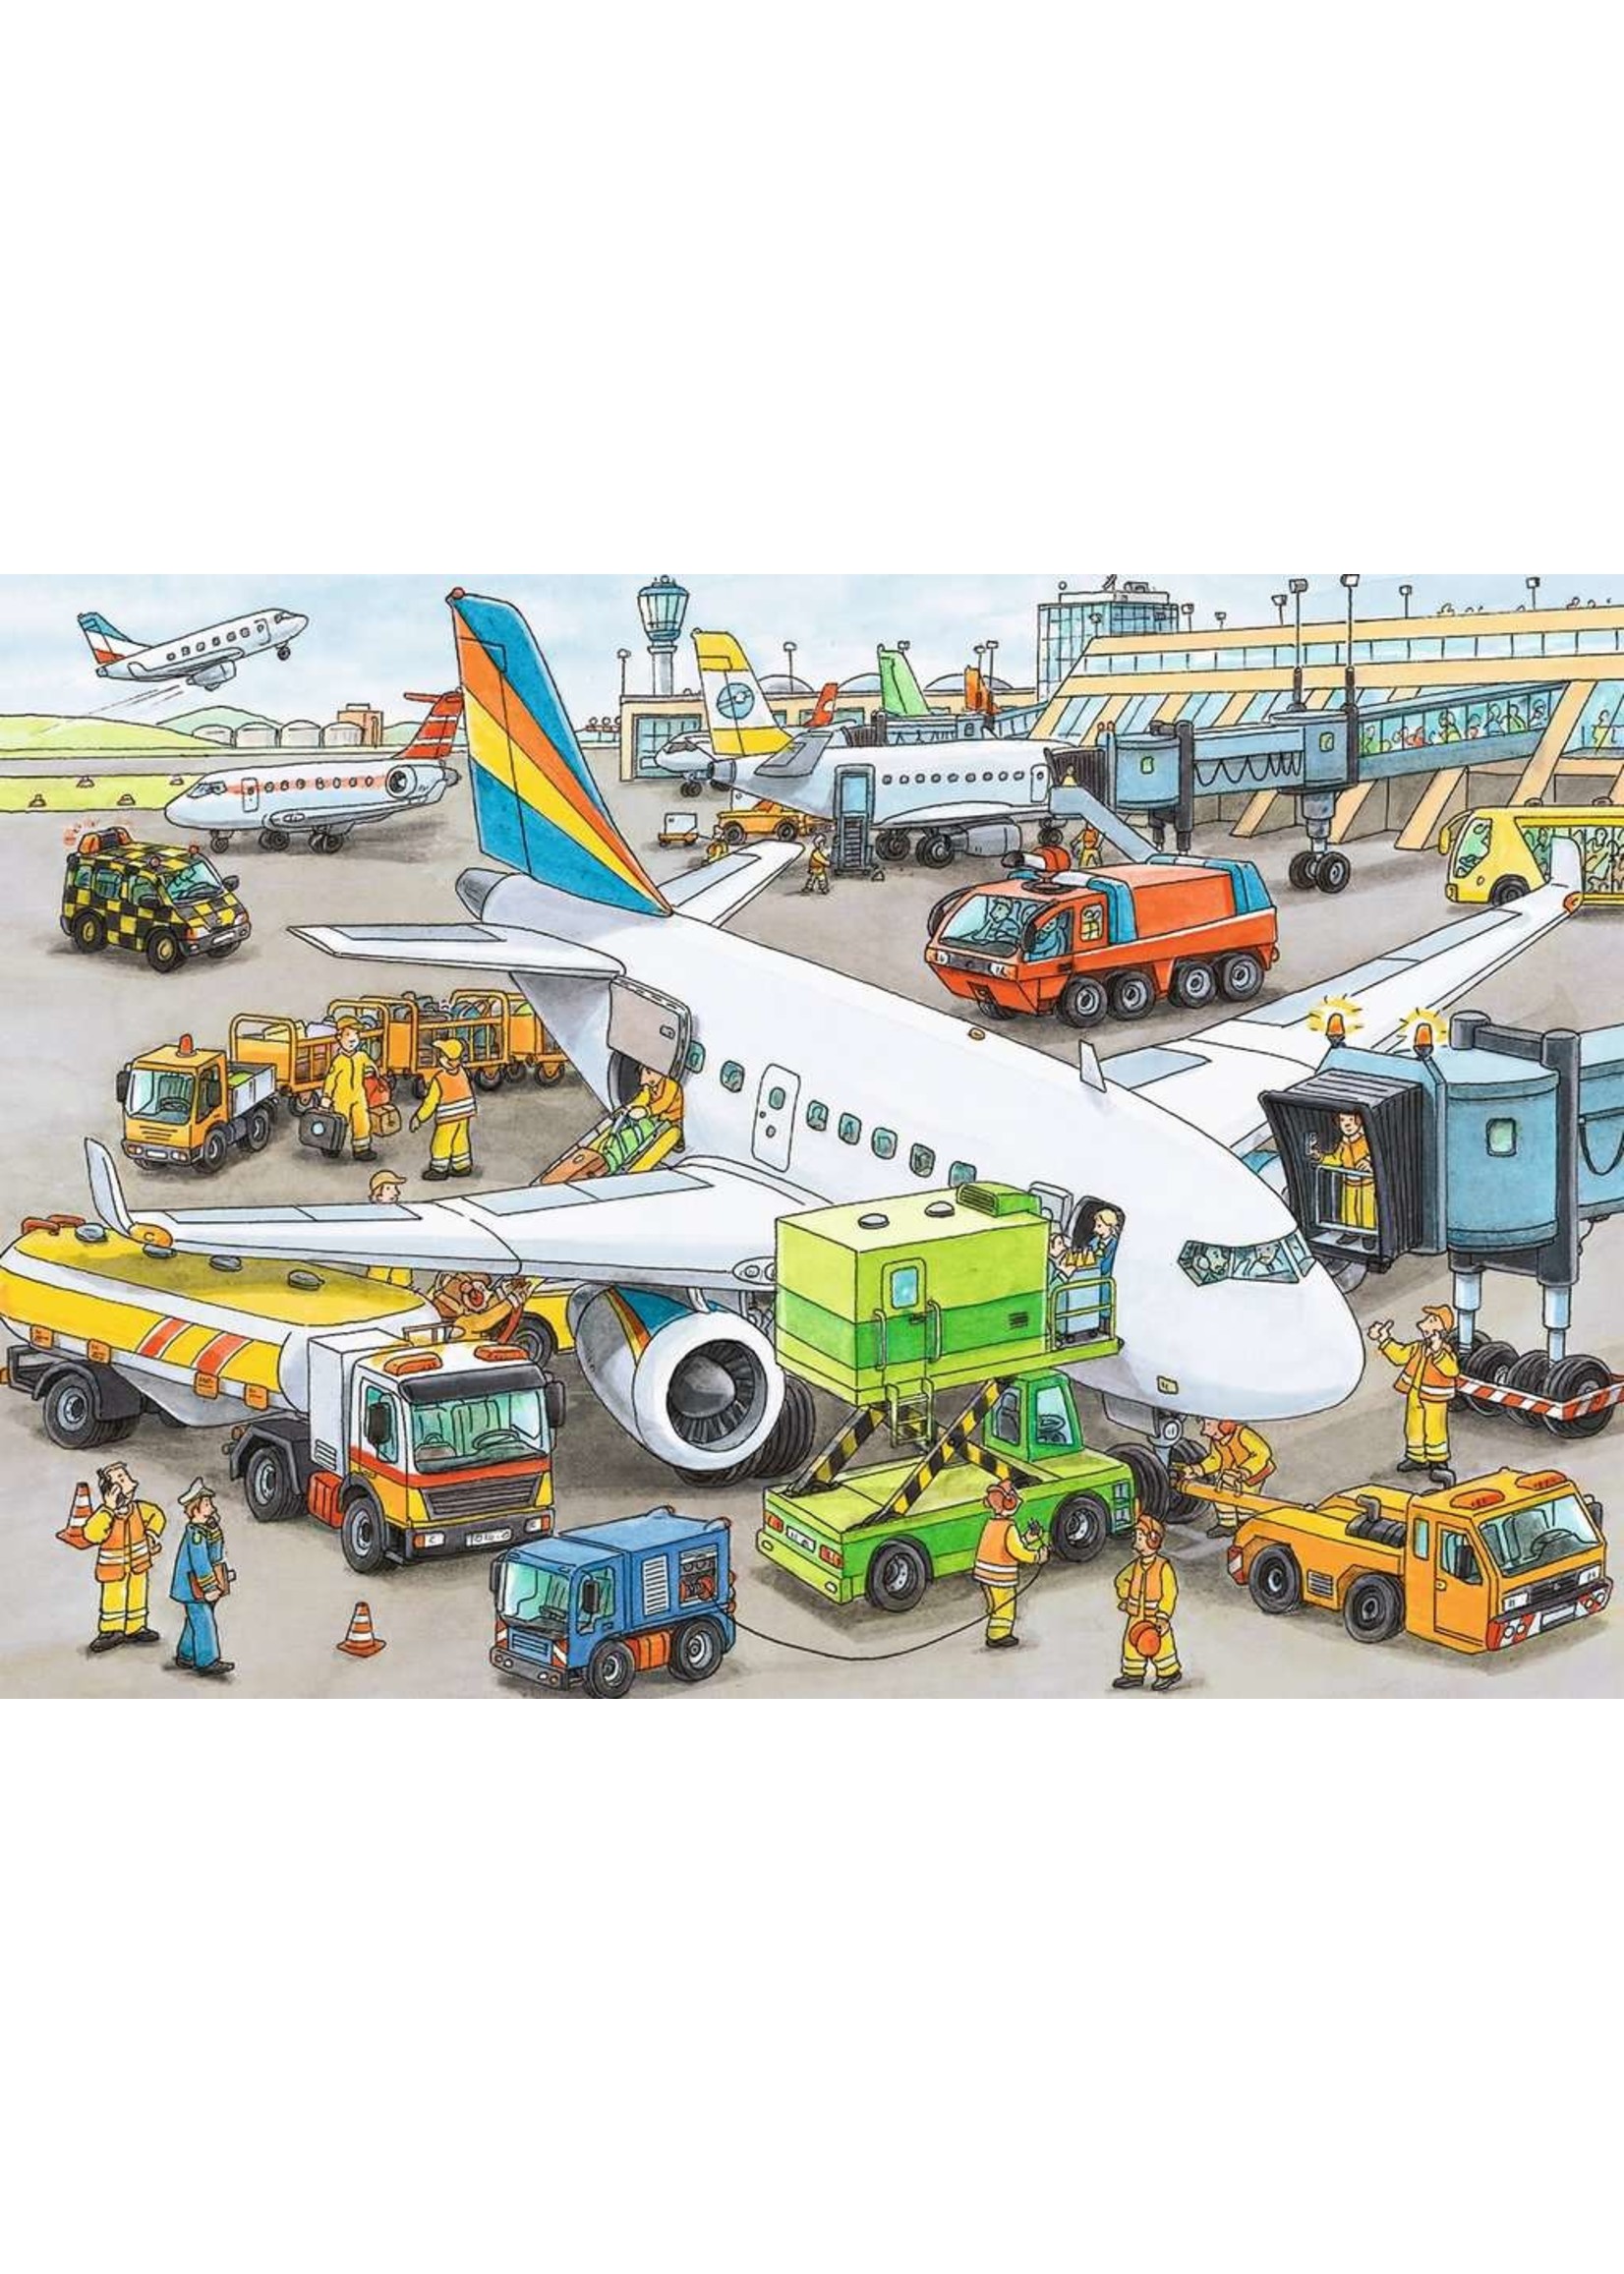 Ravensburger Busy Airport - 35 Piece Puzzle